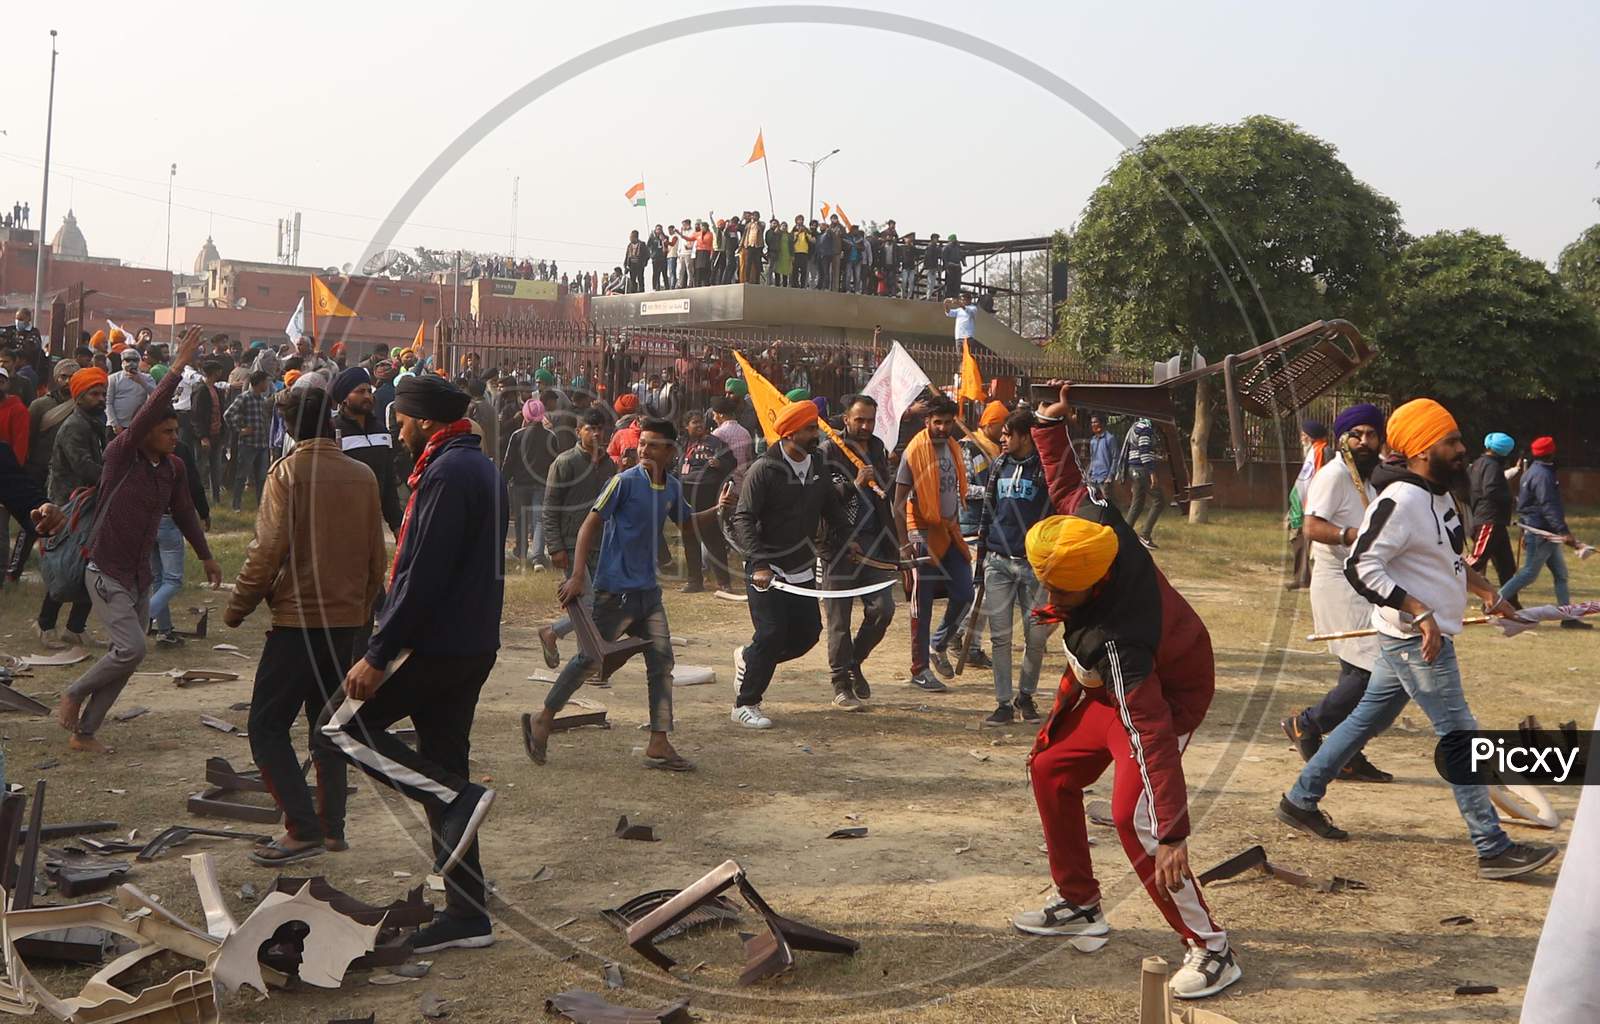 Farmers rally against agriculture reforms turned violent, after protesting farmers storm Delhi's historic Red Fort complex on January 26, 2021.